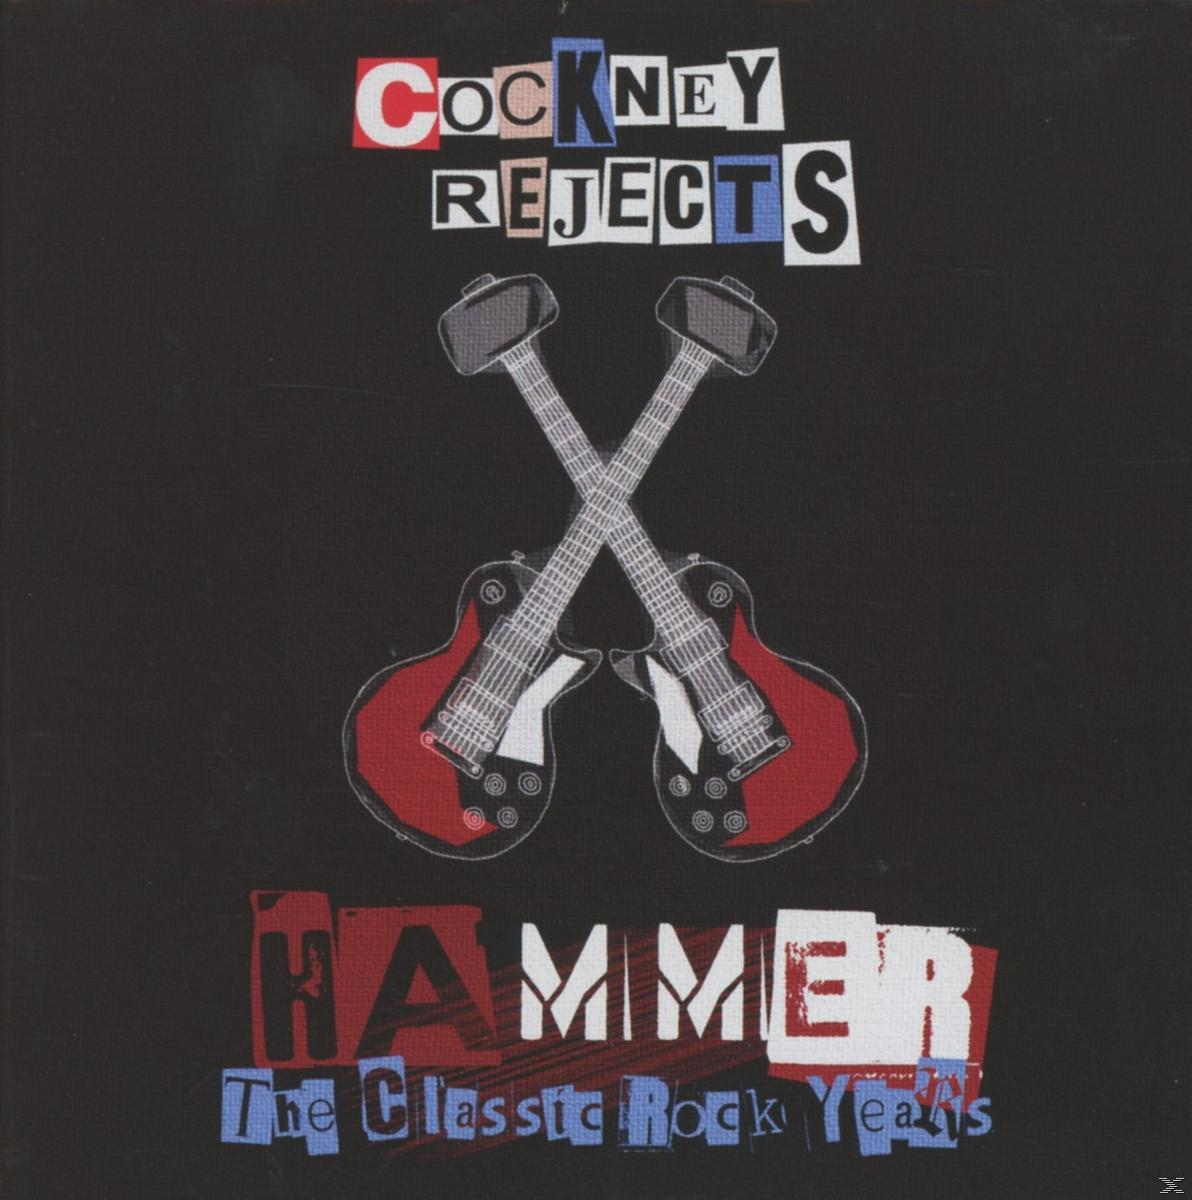 Years Cockney - Rock Classic - Hammer-The (CD) Rejects